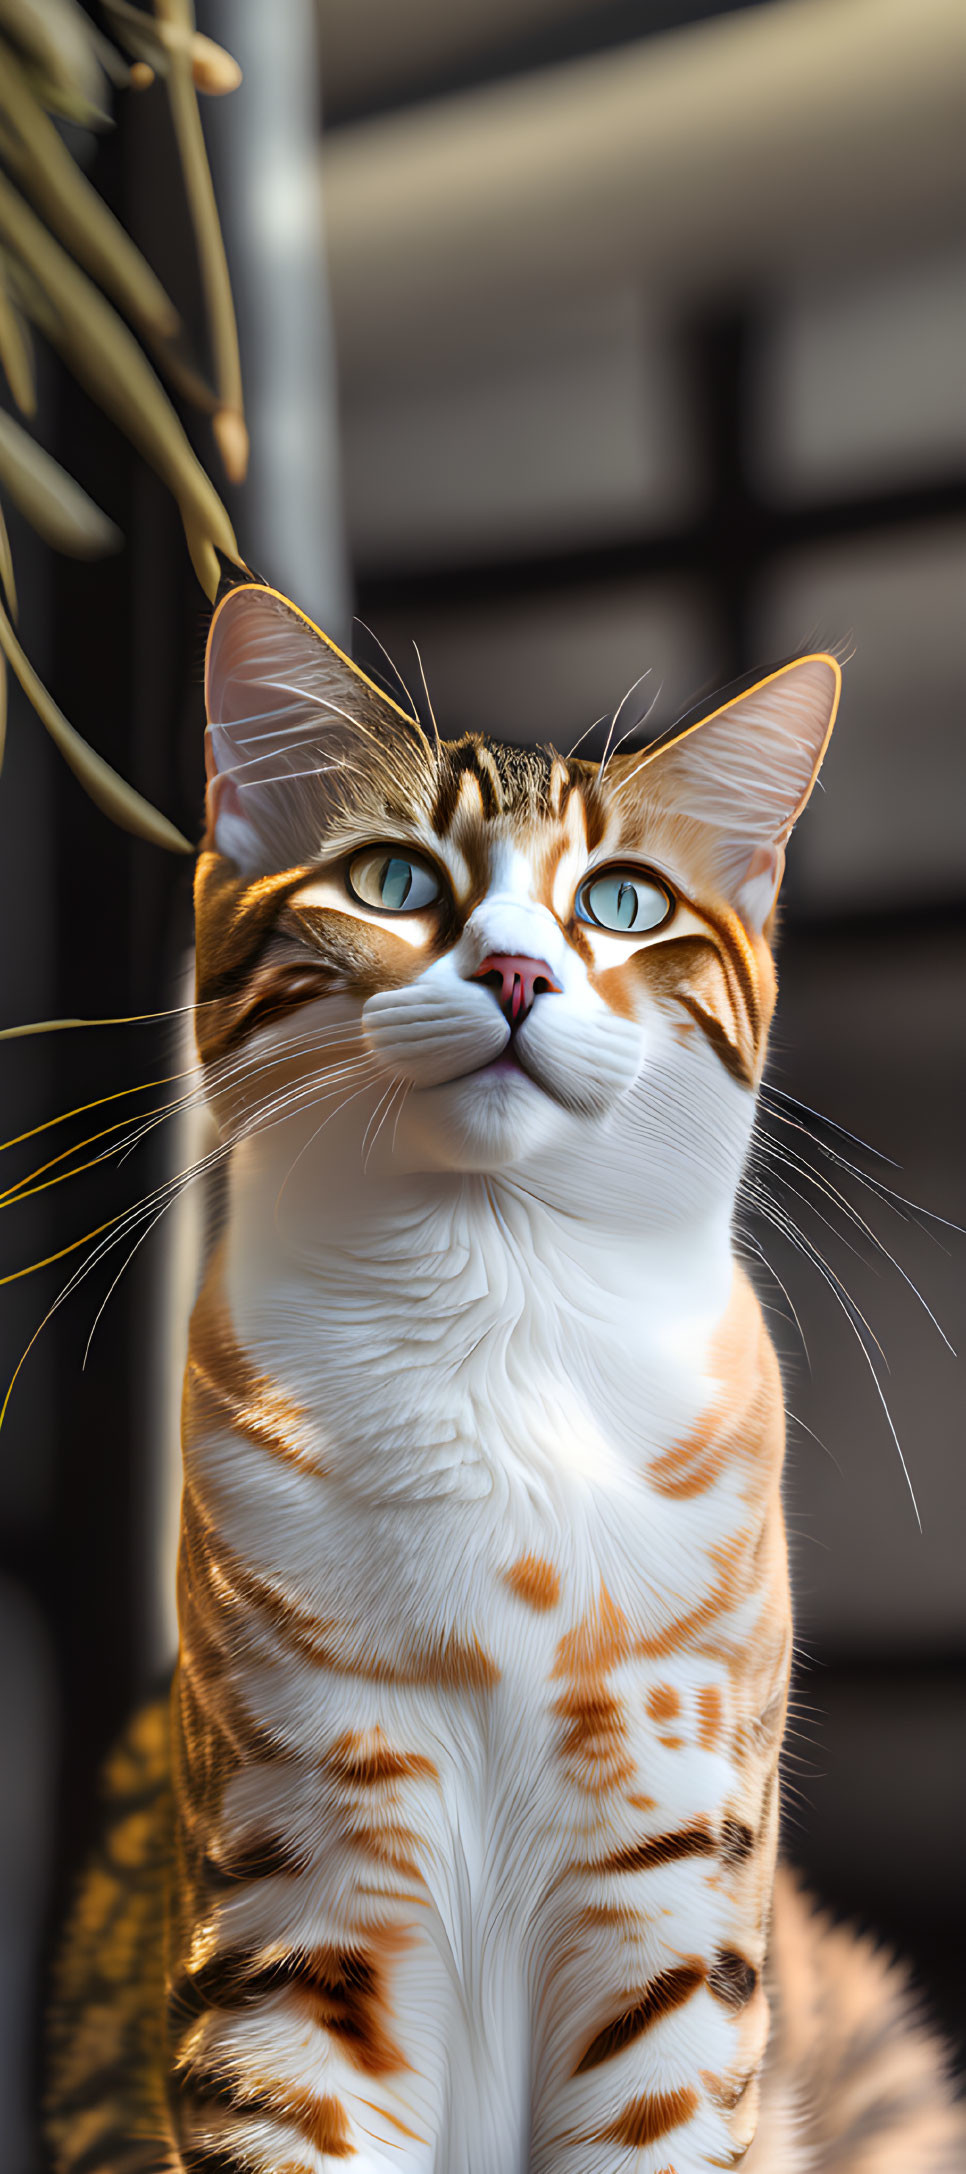 Brown and White Tabby Cat with Green Eyes Against Blurred Background